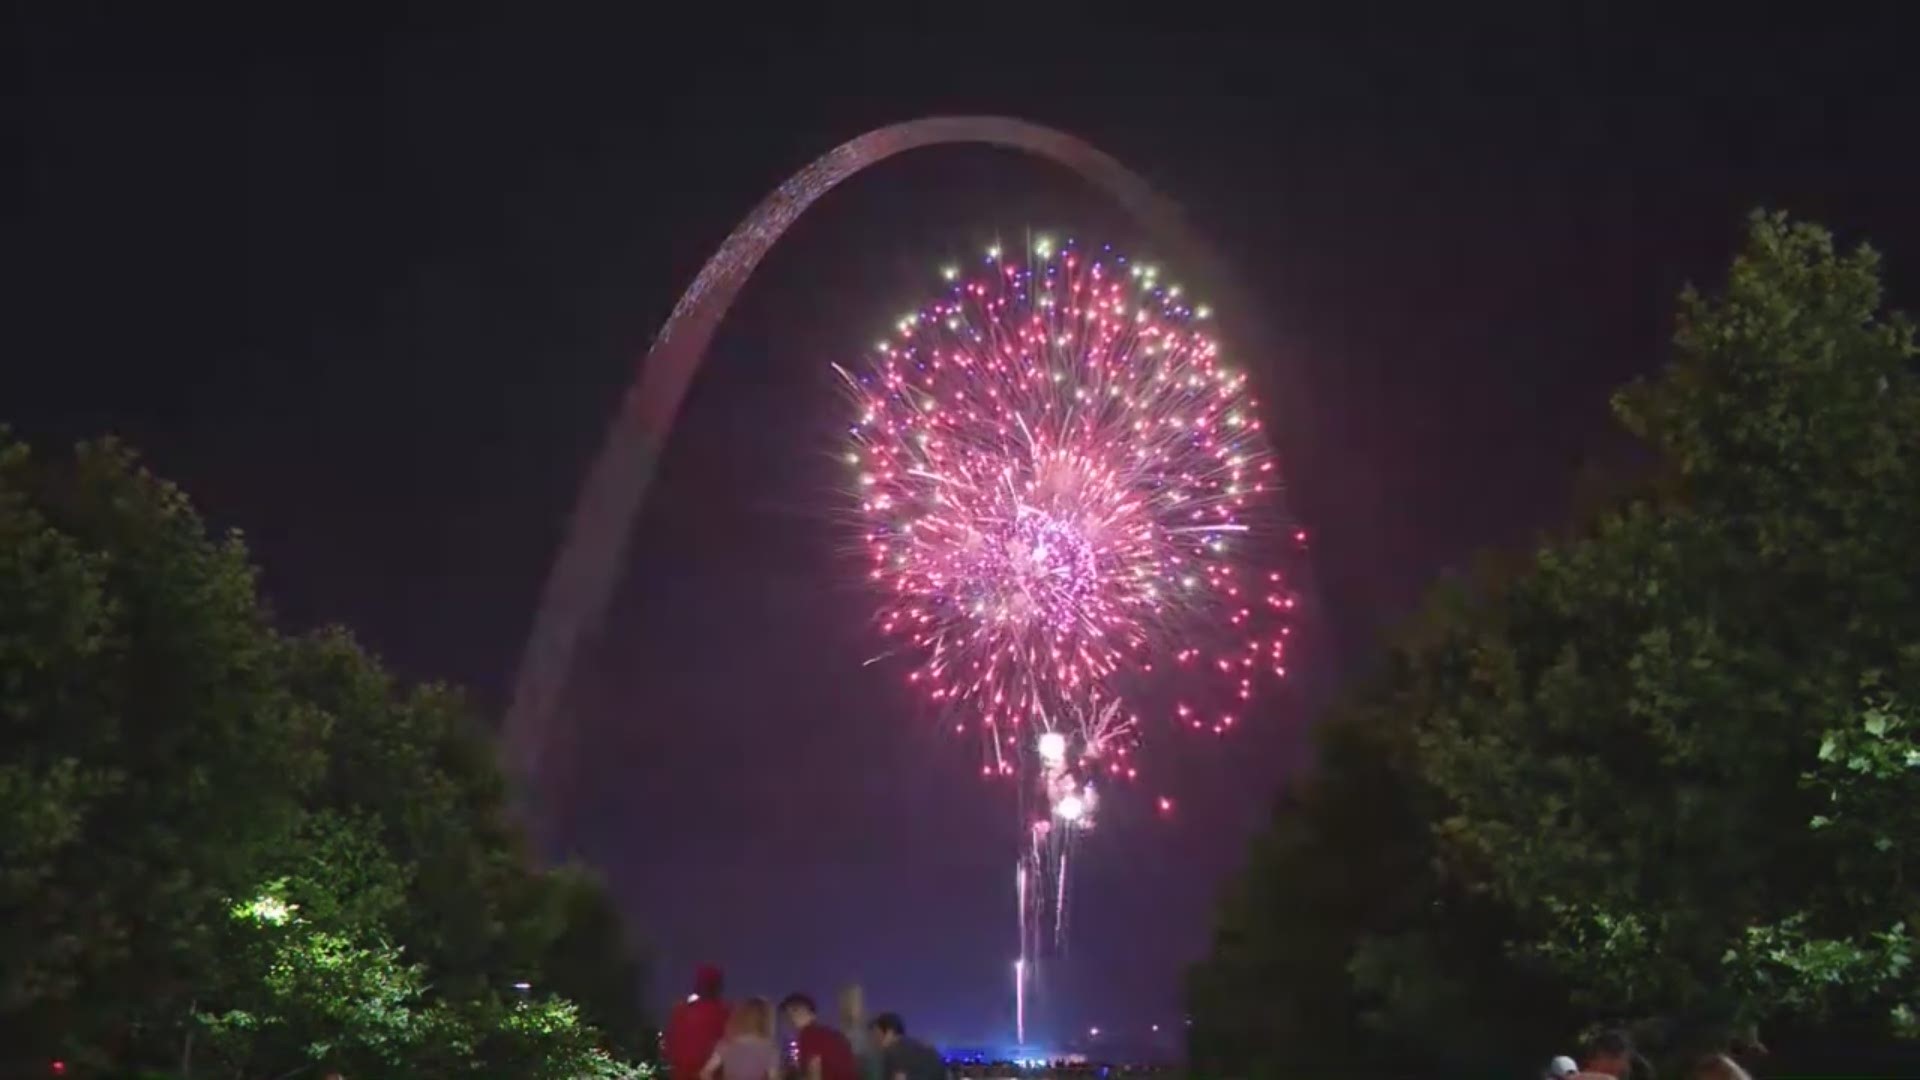 Here is a look at the fireworks in downtown St. Louis on the Fourth of July. This was at Fair Saint Louis at the Gateway Arch grounds.